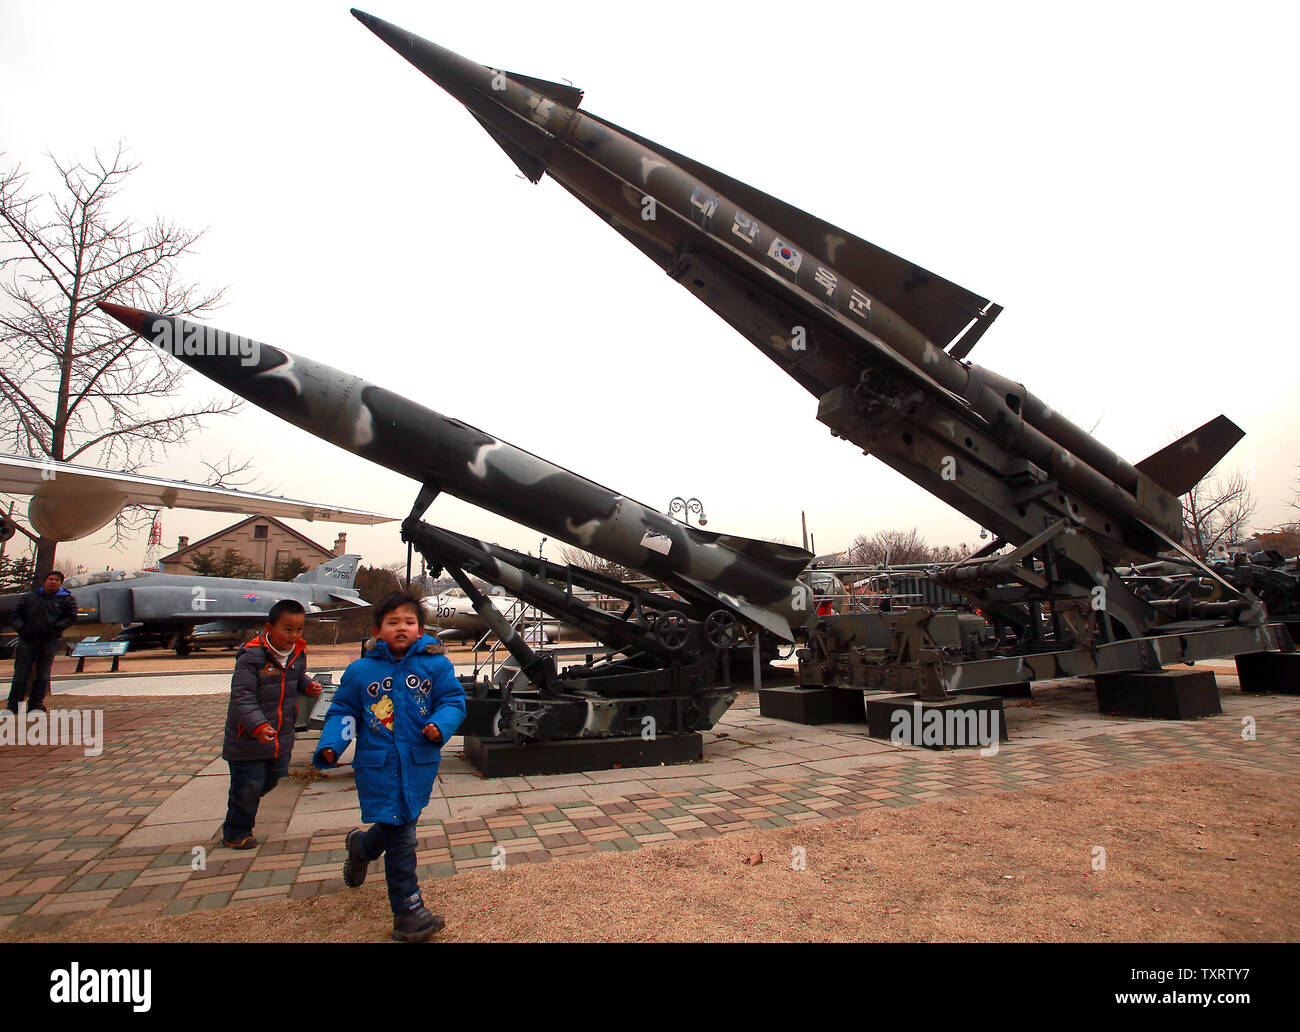 American MIM-24 Nike Hercules (L) and MGM-Lance missiles are on display at the War Memorial of Korea in Seoul on January 28, 2013.   North Korea said last week that it plans to carry out a new nuclear test and more long-range rocket launches, all of which it said are part of a new phase of confrontation with the United States.  North Korea also warned of the possibility of 'strong physical counter-measures' against South Korea if they support tougher UN sanctions.    UPI/Stephen Shaver Stock Photo